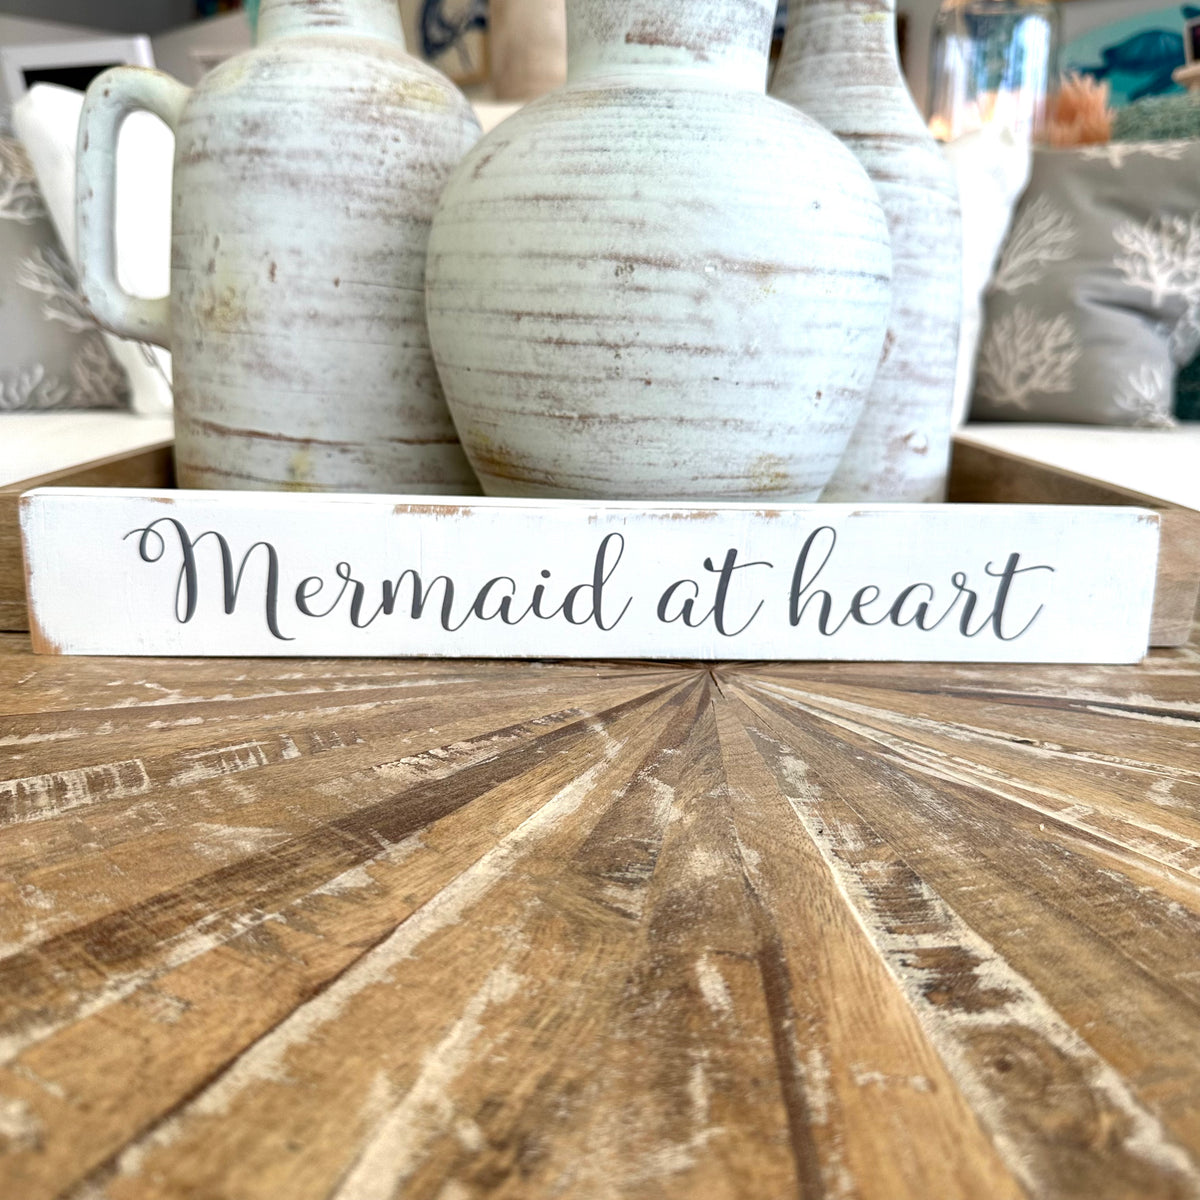 "Mermaid at heart" Wooden Table Sitter